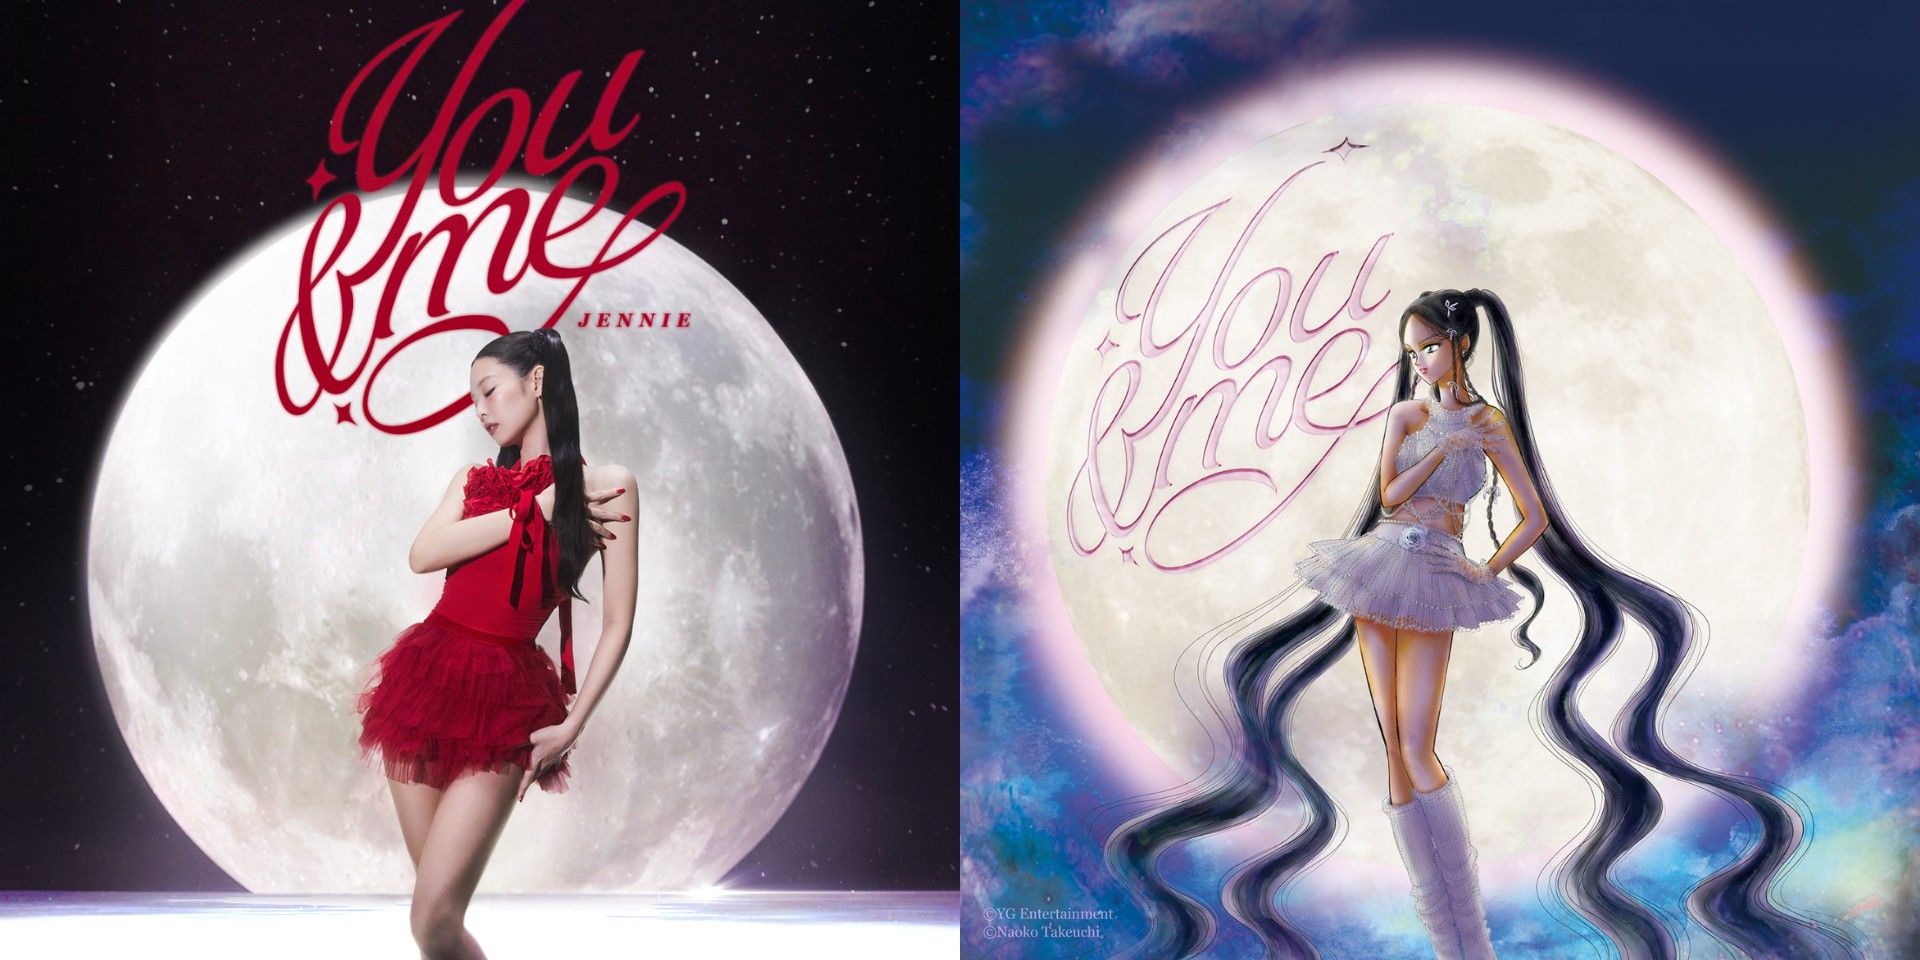 BLACKPINK's JENNIE and Sailor Moon creator Naoko Takeuchi team up for 'You & Me' single cover and merch
 